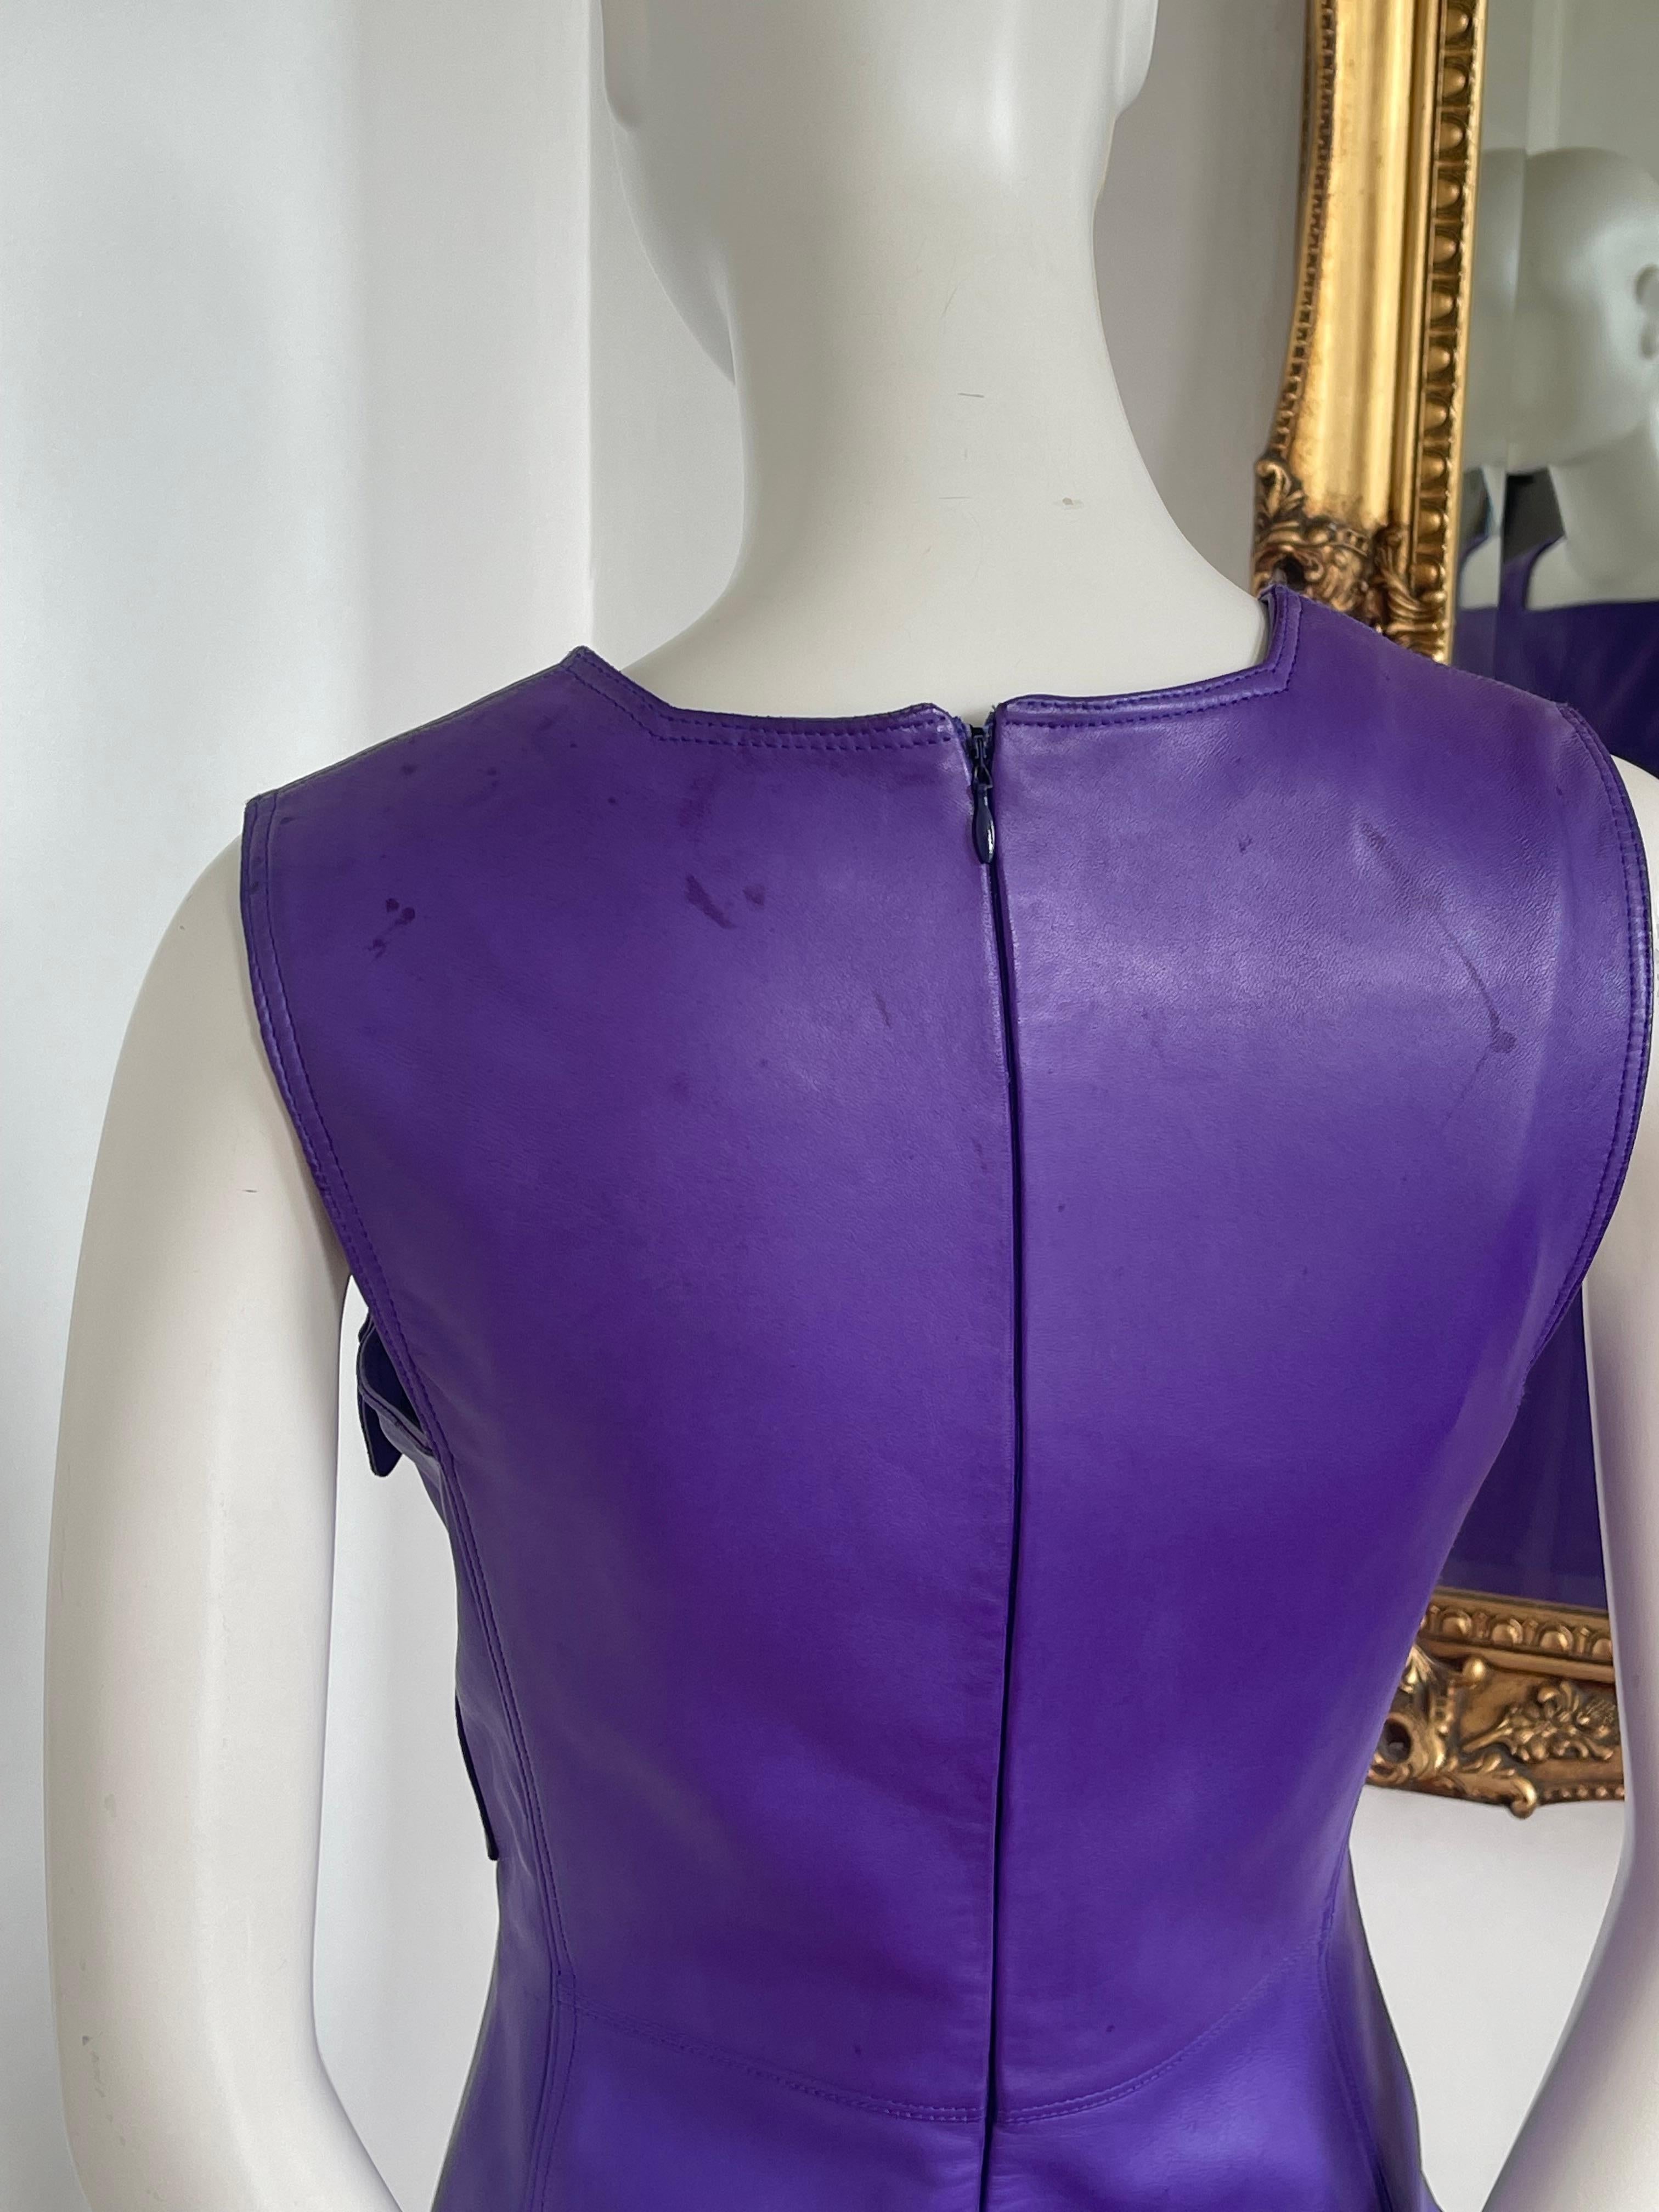 FW 1996 Versace purple leather shift dress with medusa buttons For Sale 3